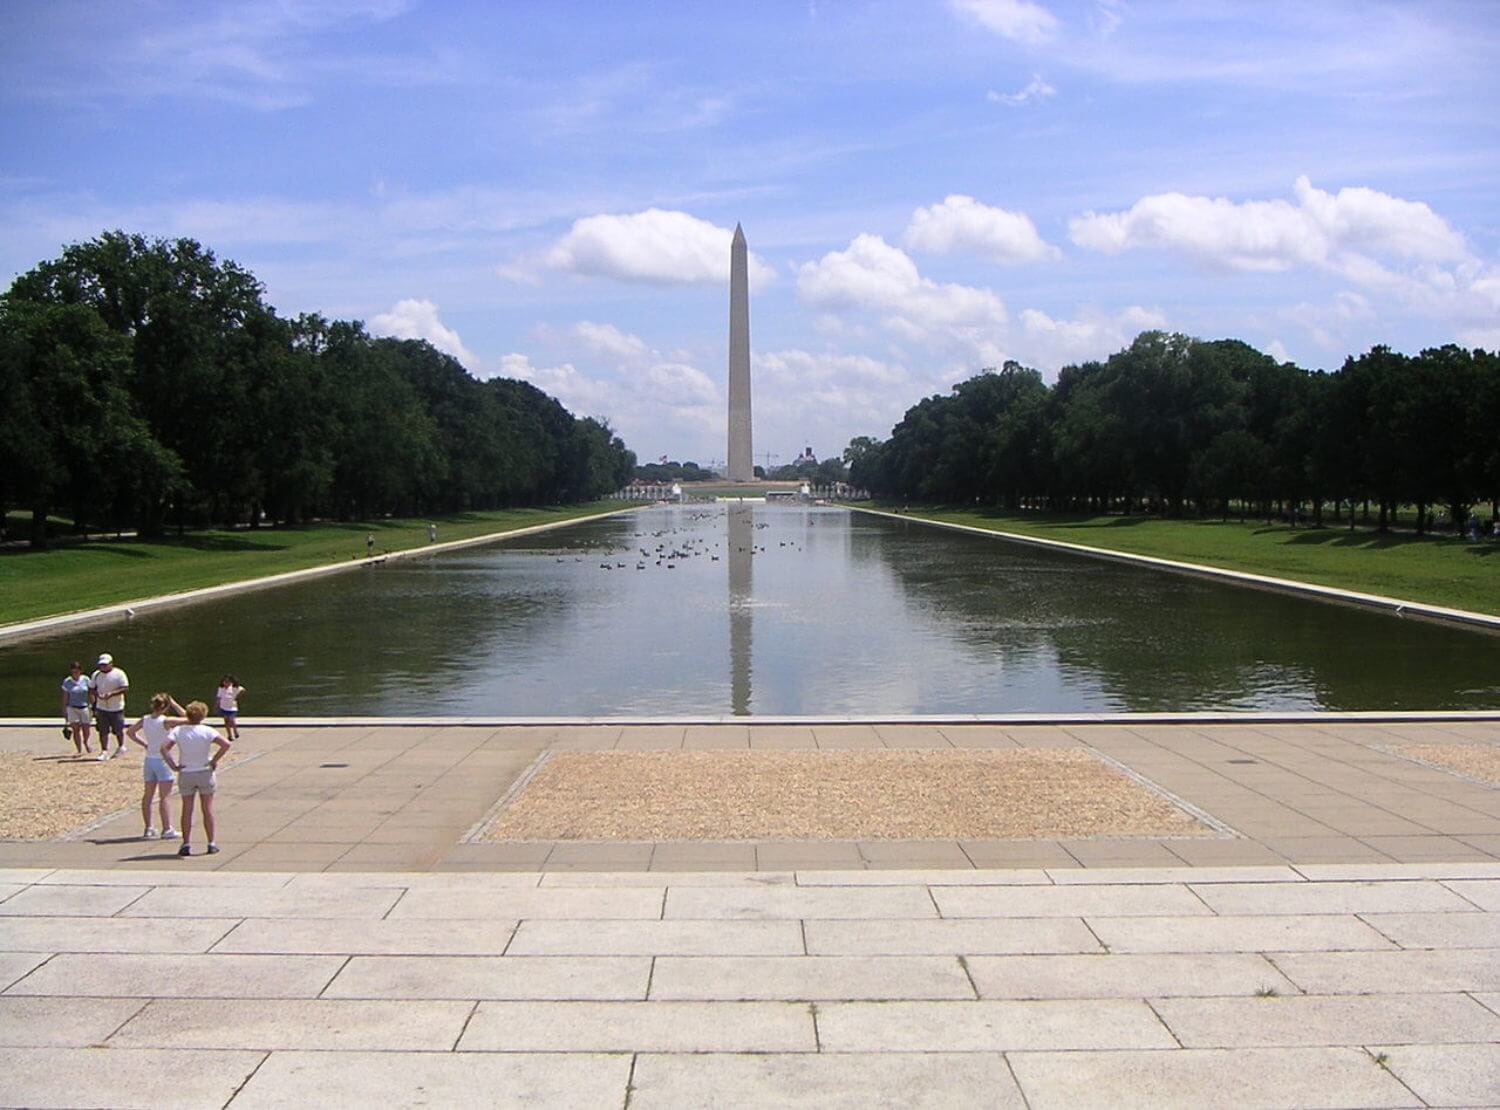 Lincoln Memorial Reflecting Pool - Wikimedia Commons photo by Dtcdthingy~commonswiki